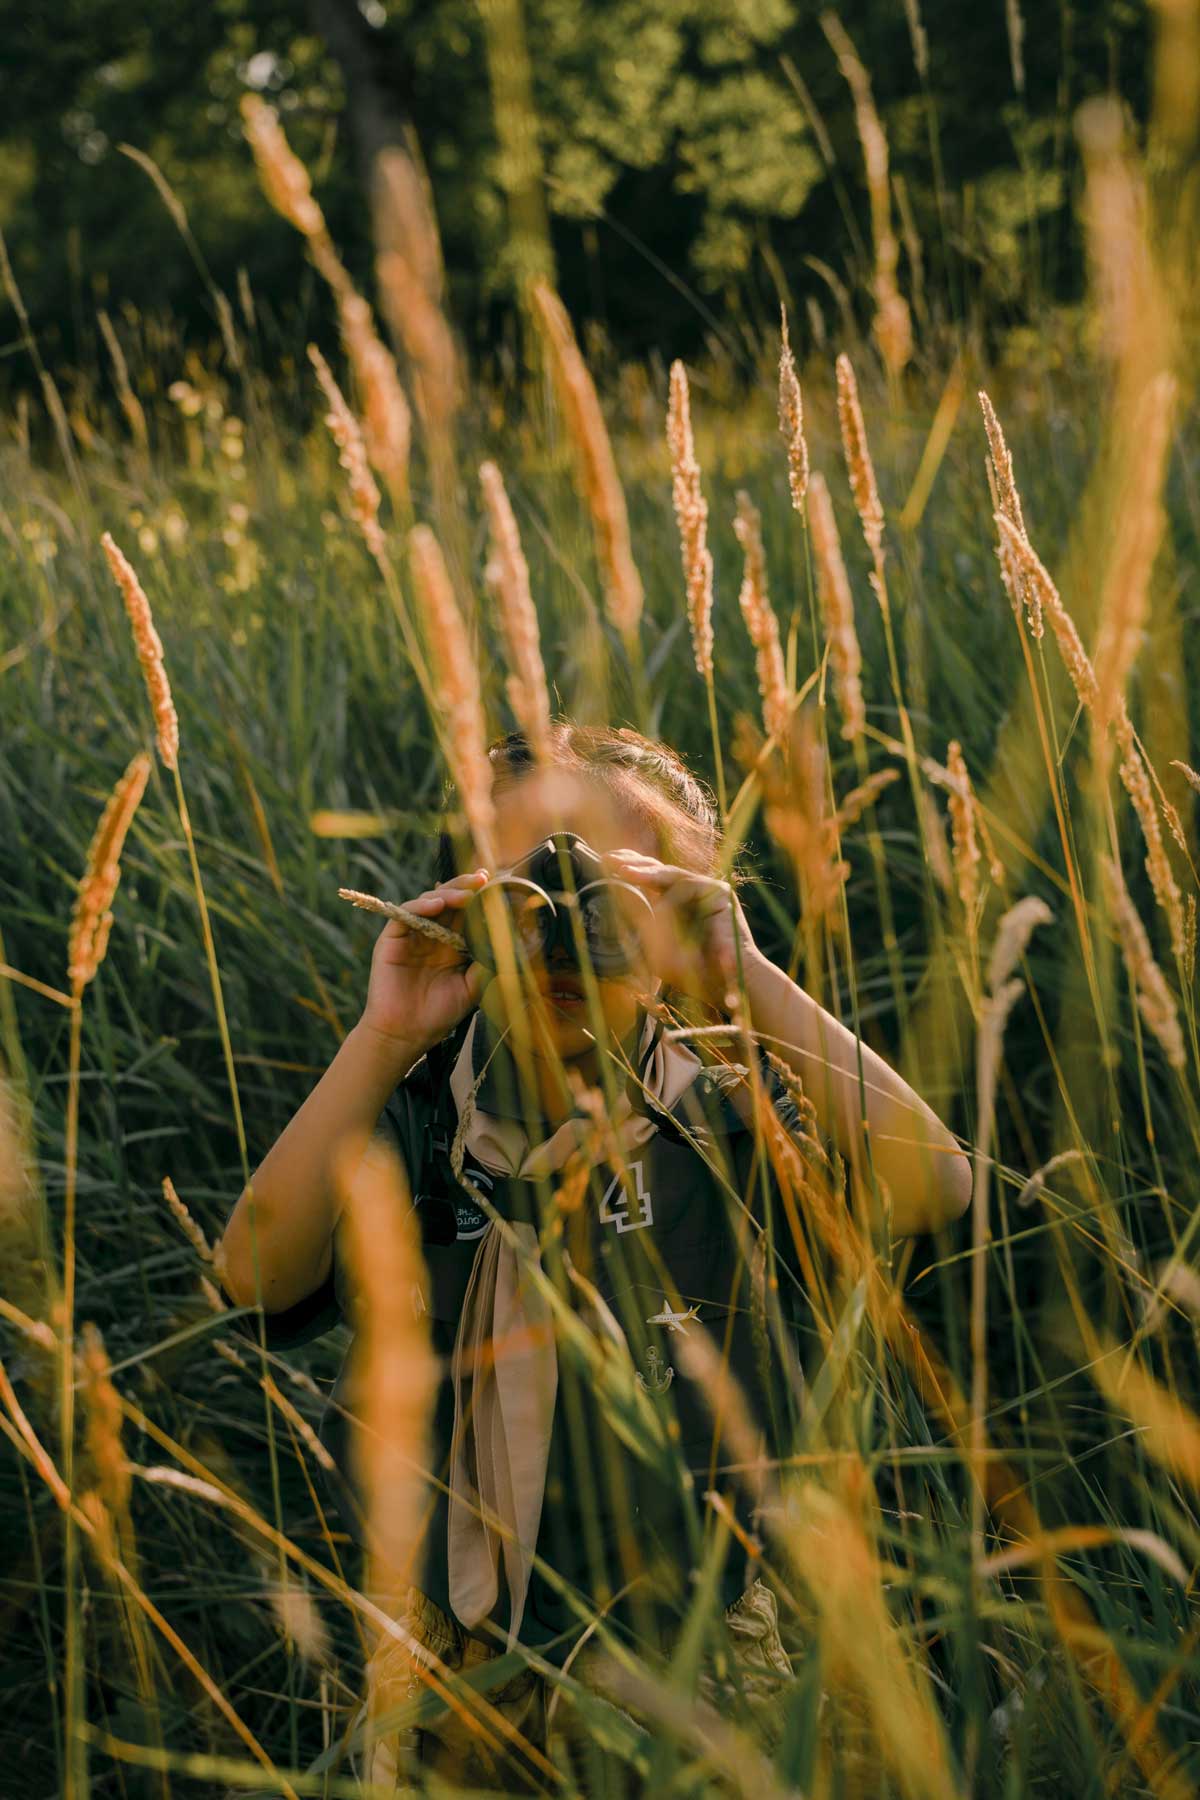 A young girl looks through binoculars to find an opportunity in the field